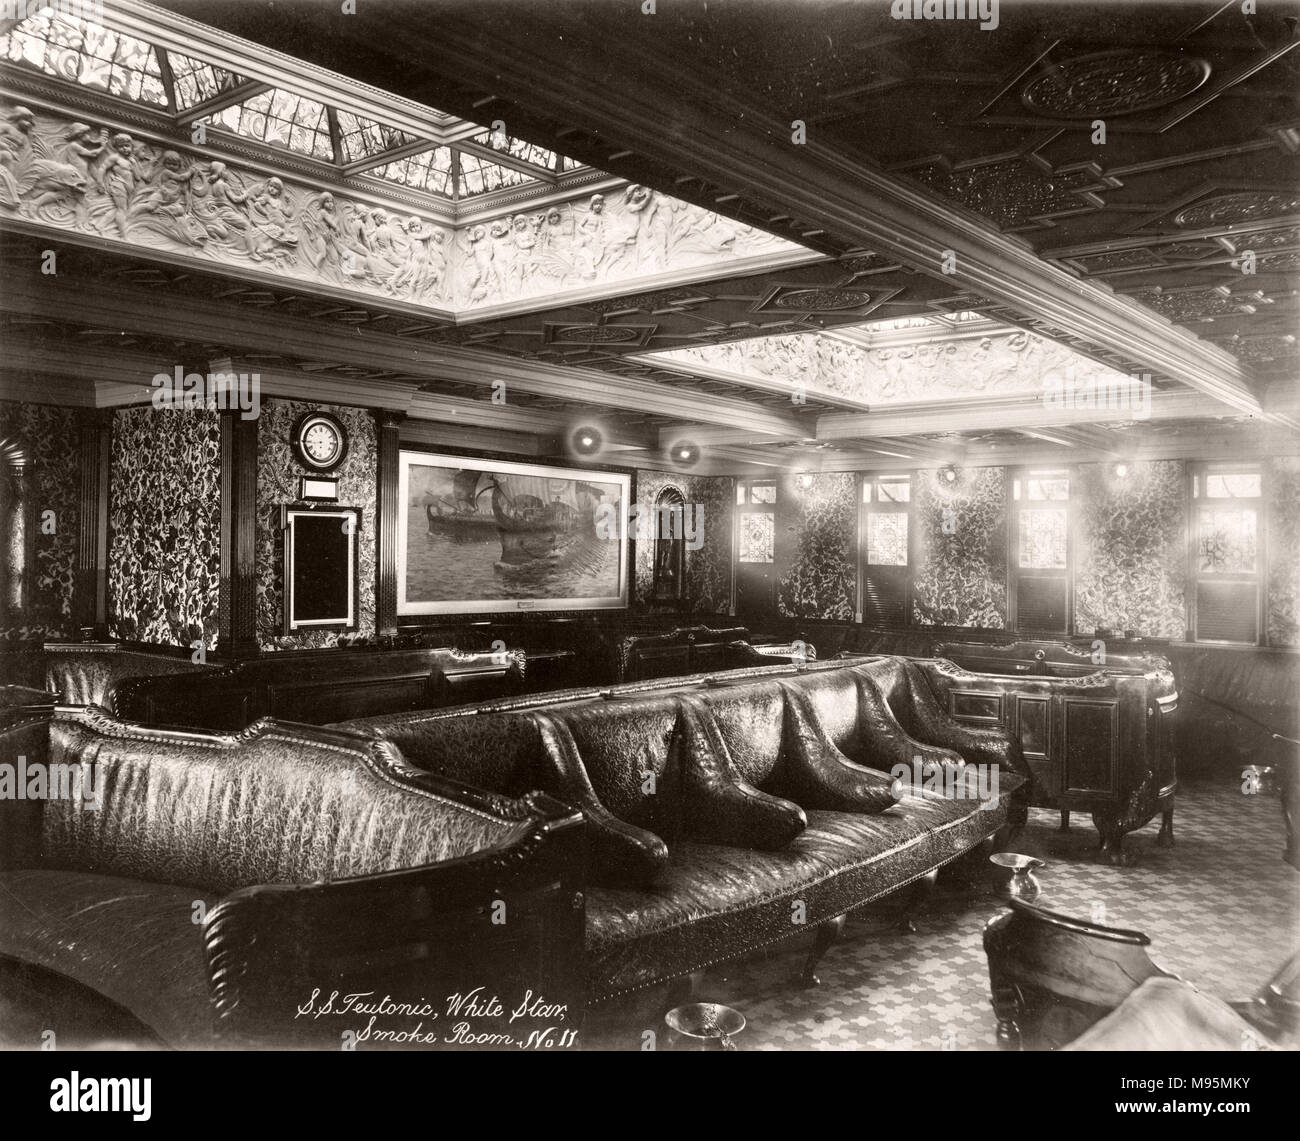 1889 photograph - RMS Teutonic - from an album of images relating to the launch of the vessel, which was built by Harland and Wolff in Belfast, for the White Star Line - later to achieve notoriety as the owner of the Titanic. The album shows interiors of the ship, member of the crew, trial cruises, including a visit onboard by the German Kaiser and Prince of Wales, as well as many images of other visitors. This image - Stock Photo